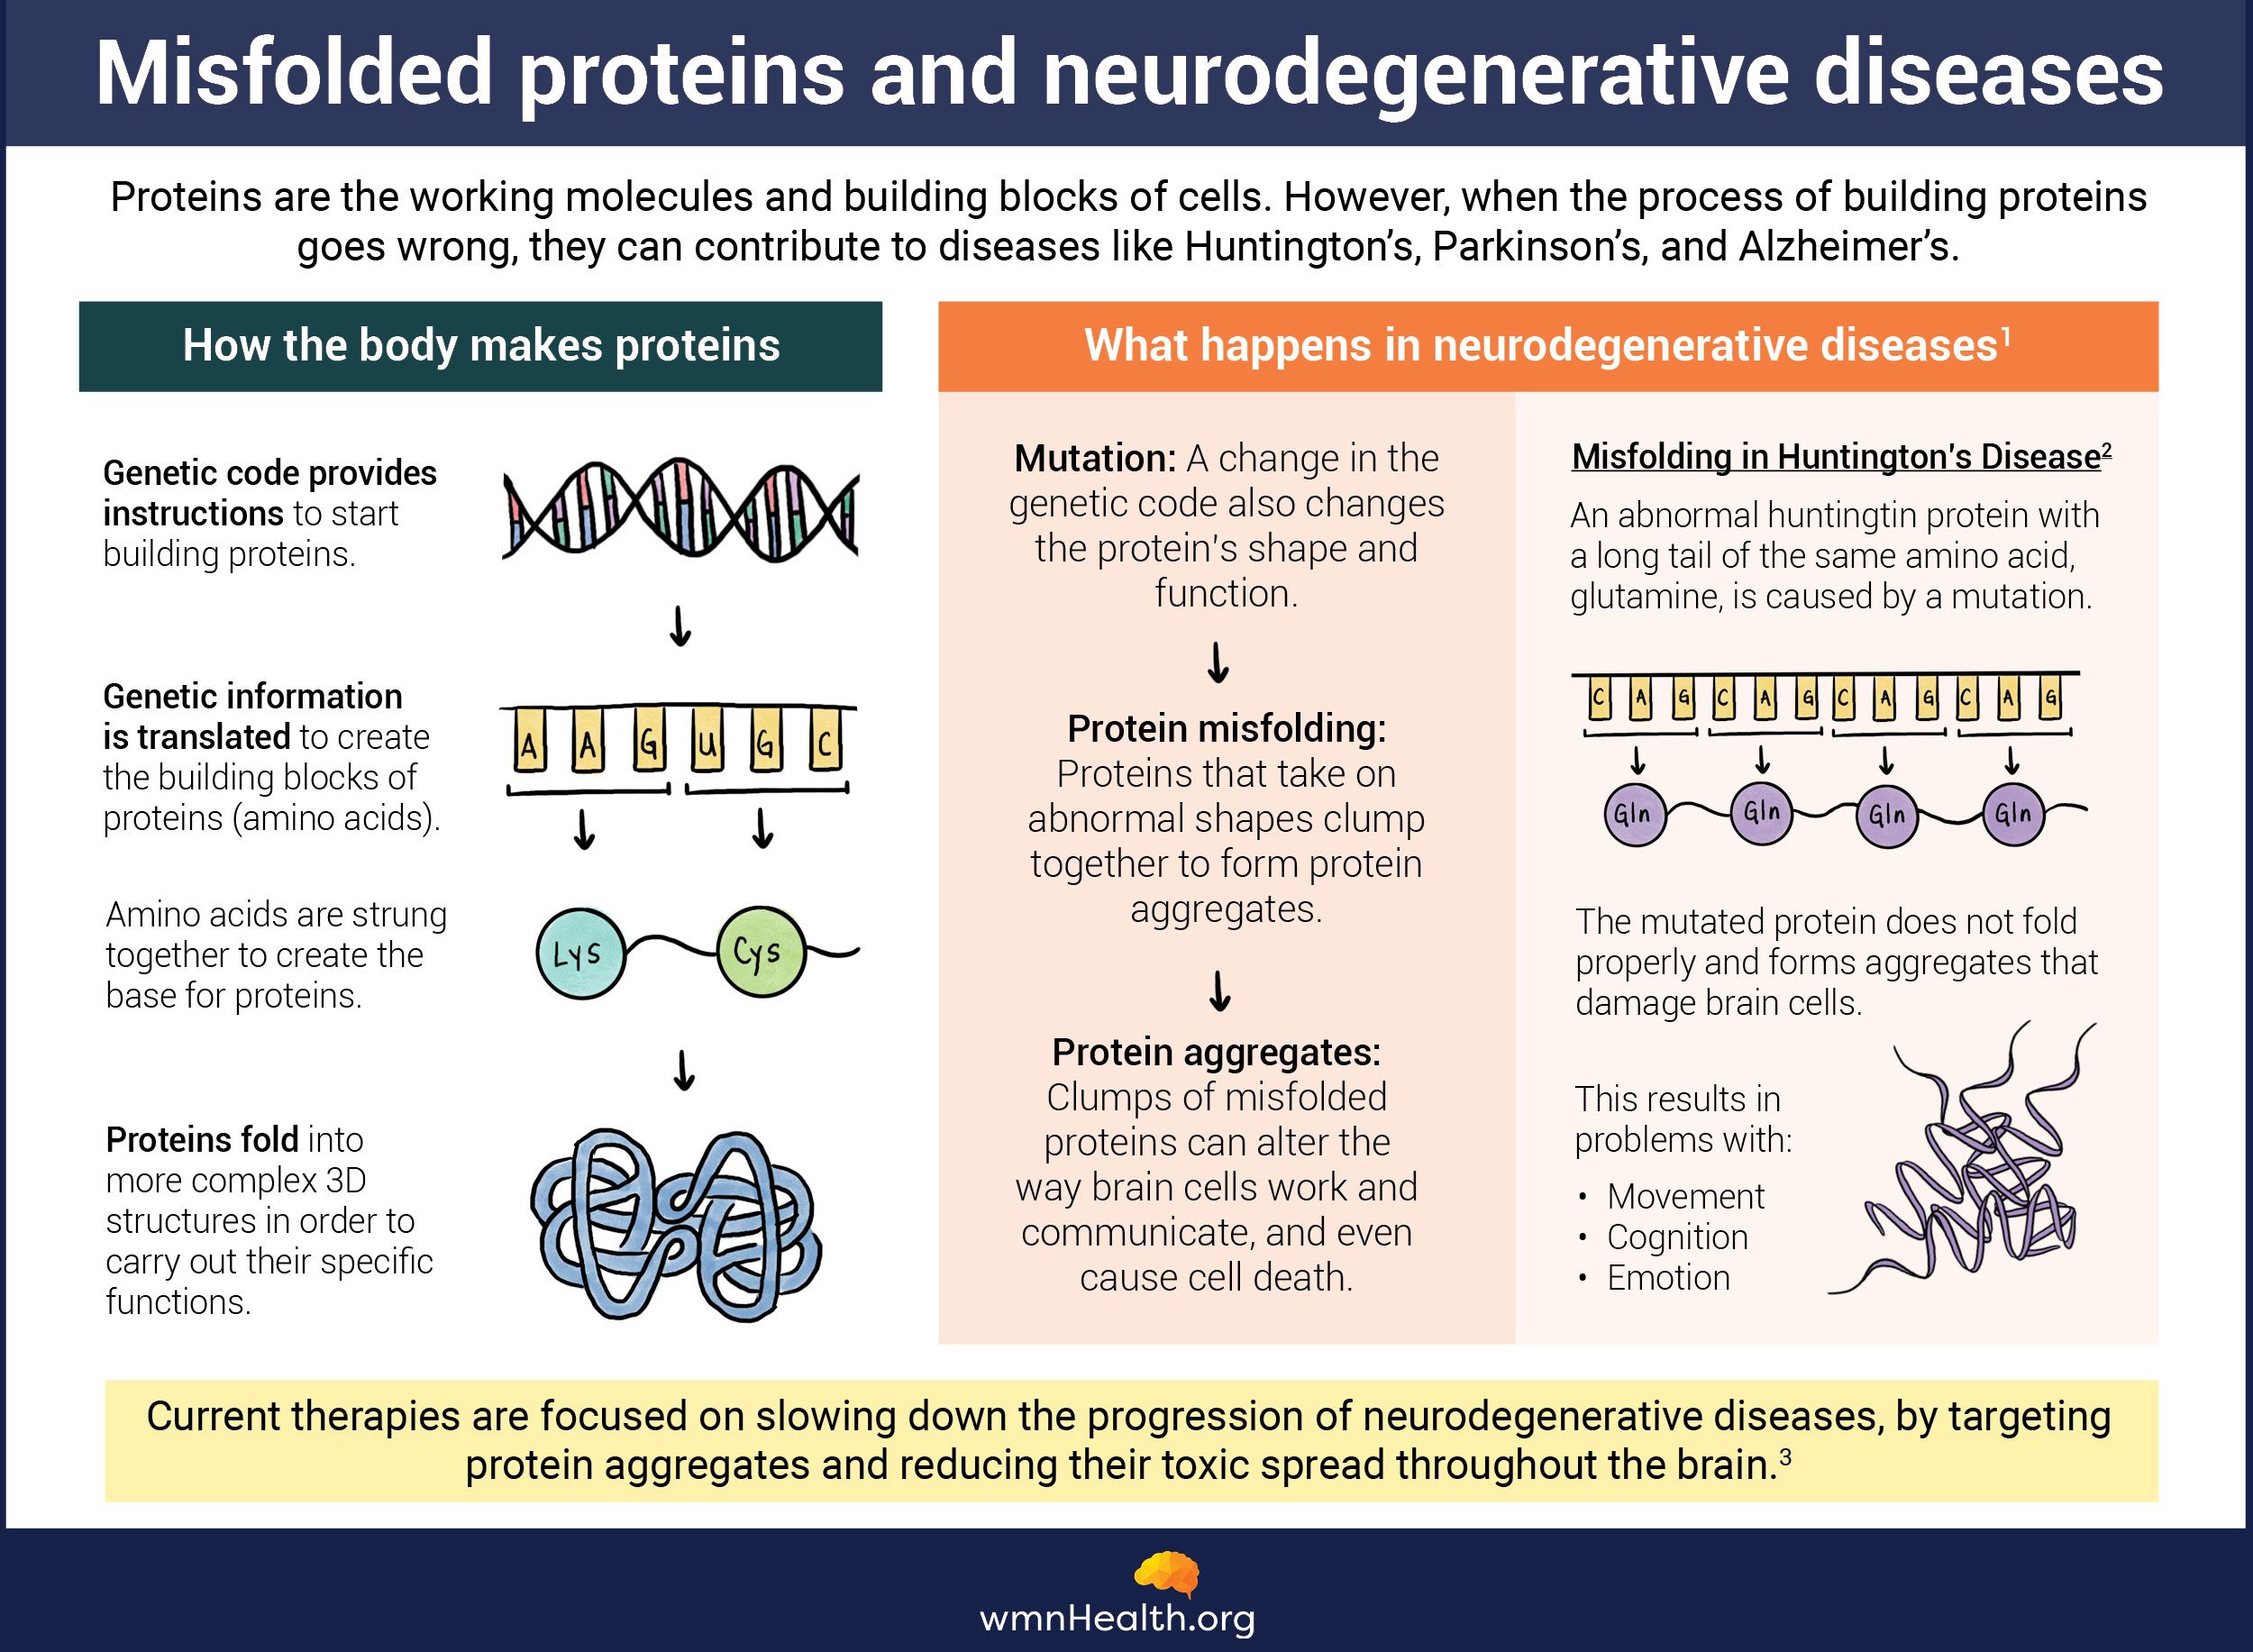 Infographic on protein folding and misfolding in neurodegenerative diseases like Alzheimer's